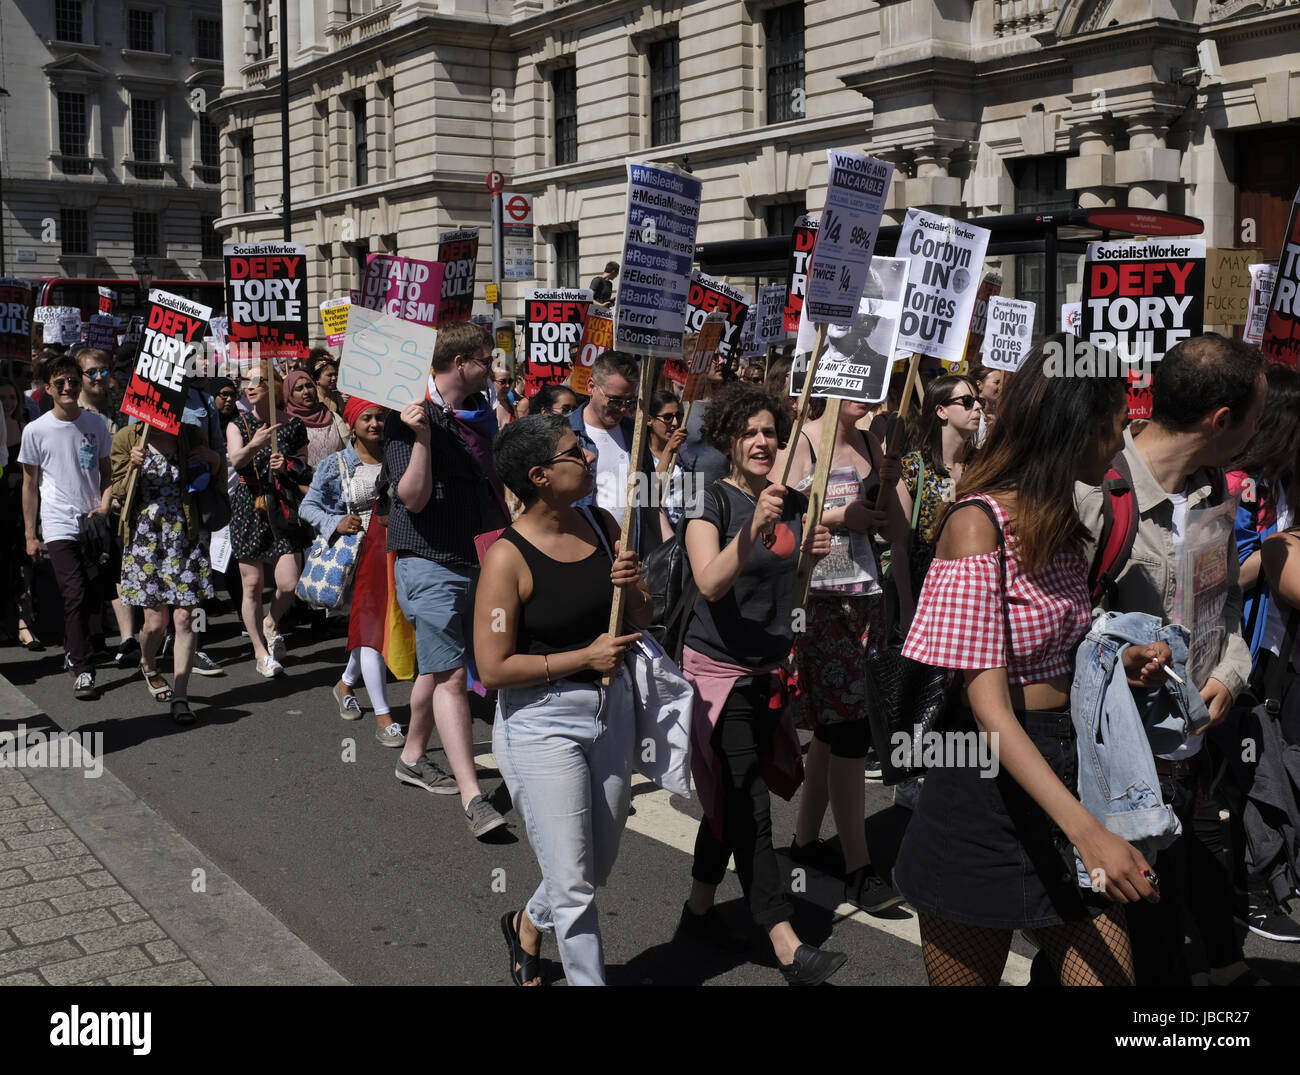 Protesters on Whitehall Street. Protesters on the streets of London, protesting the Tory Government and Prime Minister Theresa May. Stock Photo